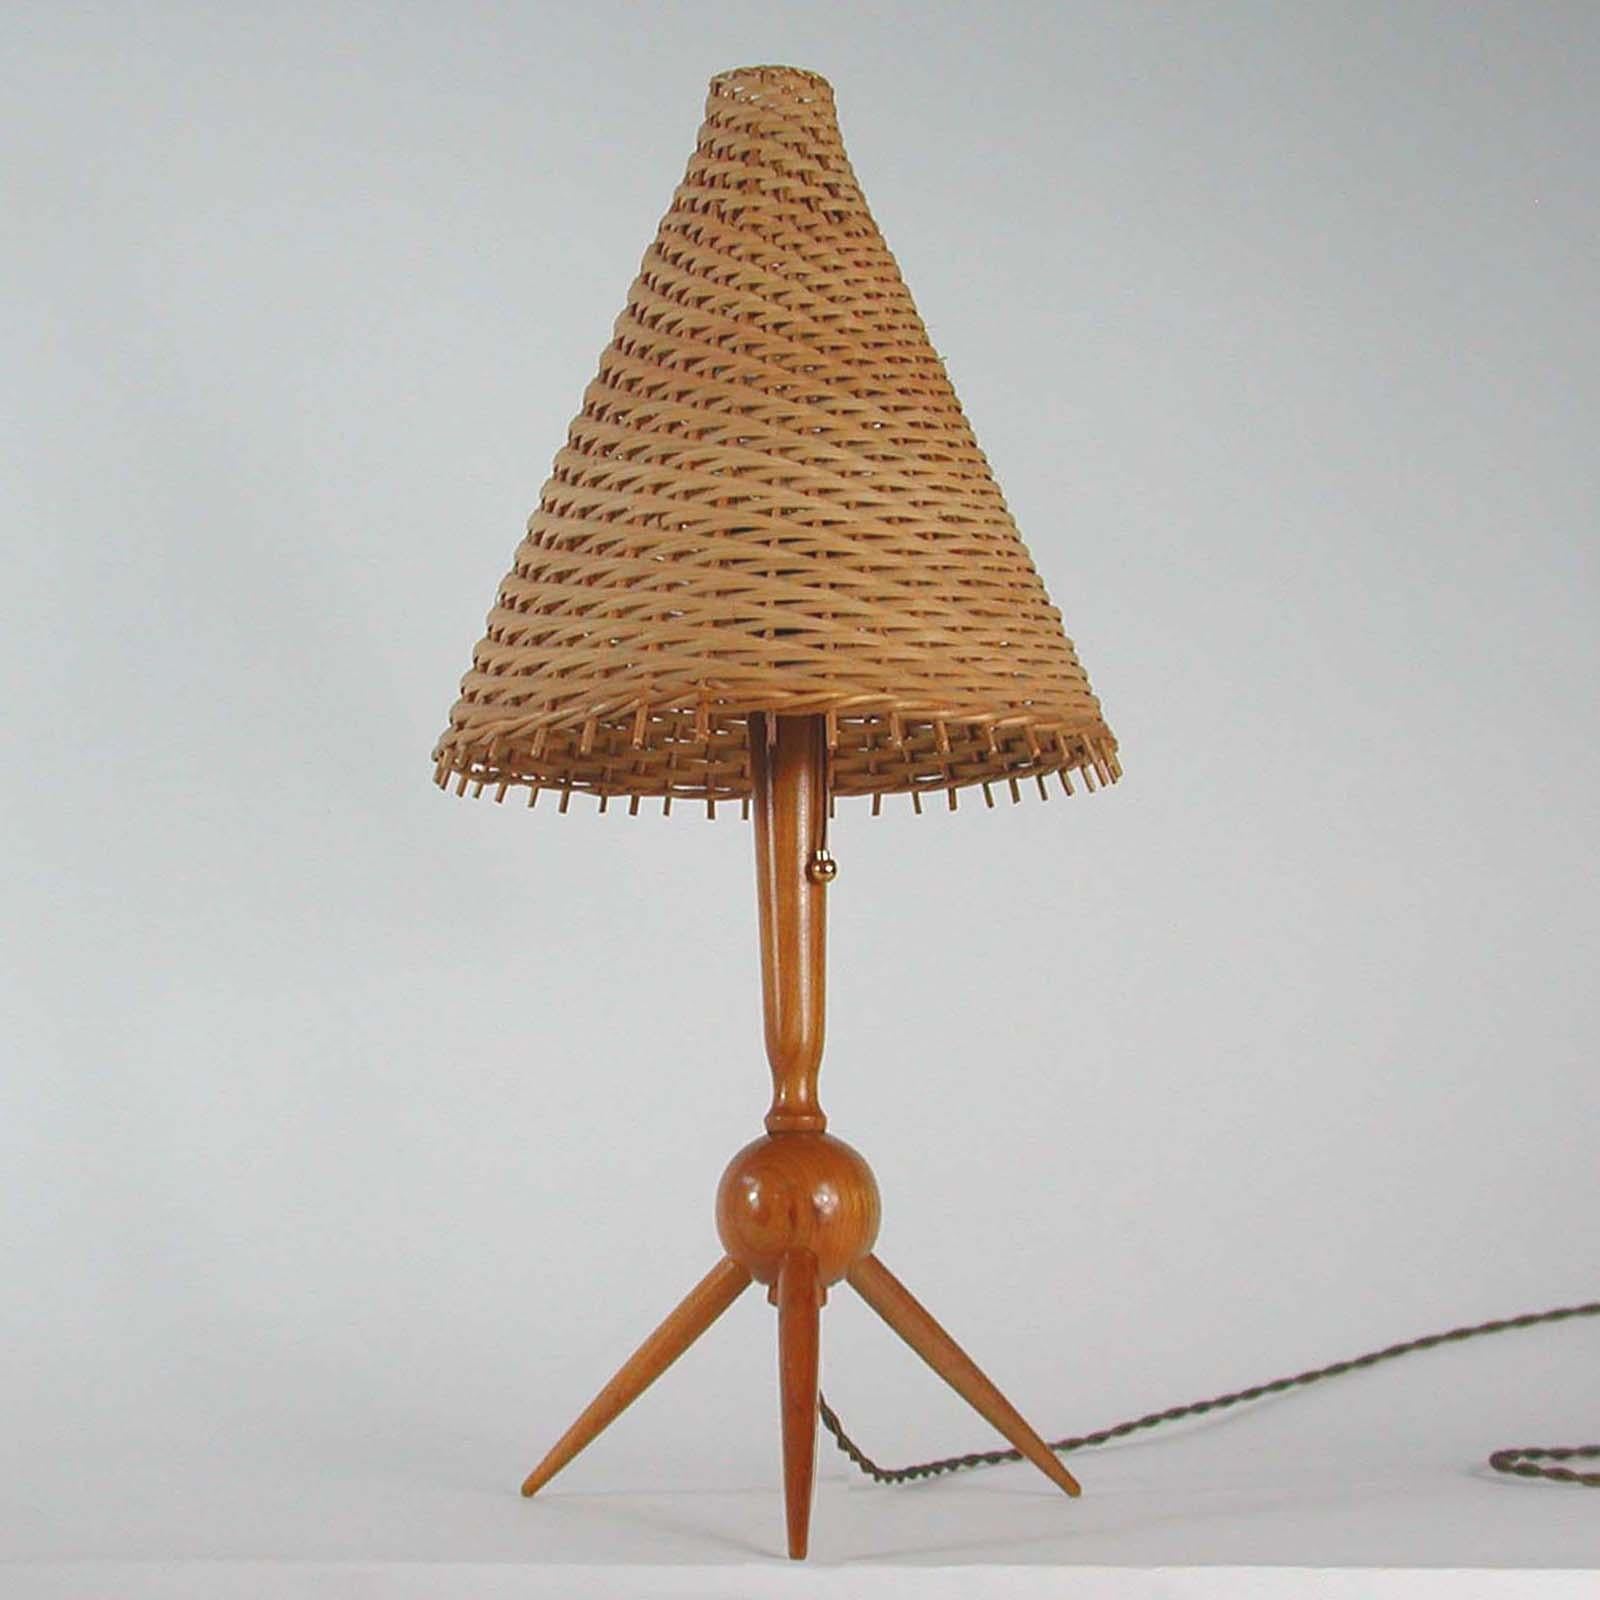 This large and elegant Scandinavian Modern table lamp was designed and manufactured in Sweden in the 1950s. It features a teak tripod base with a rattan witch hat shaped shade and requires a E27 bulb.

An awesome design with period style tapered